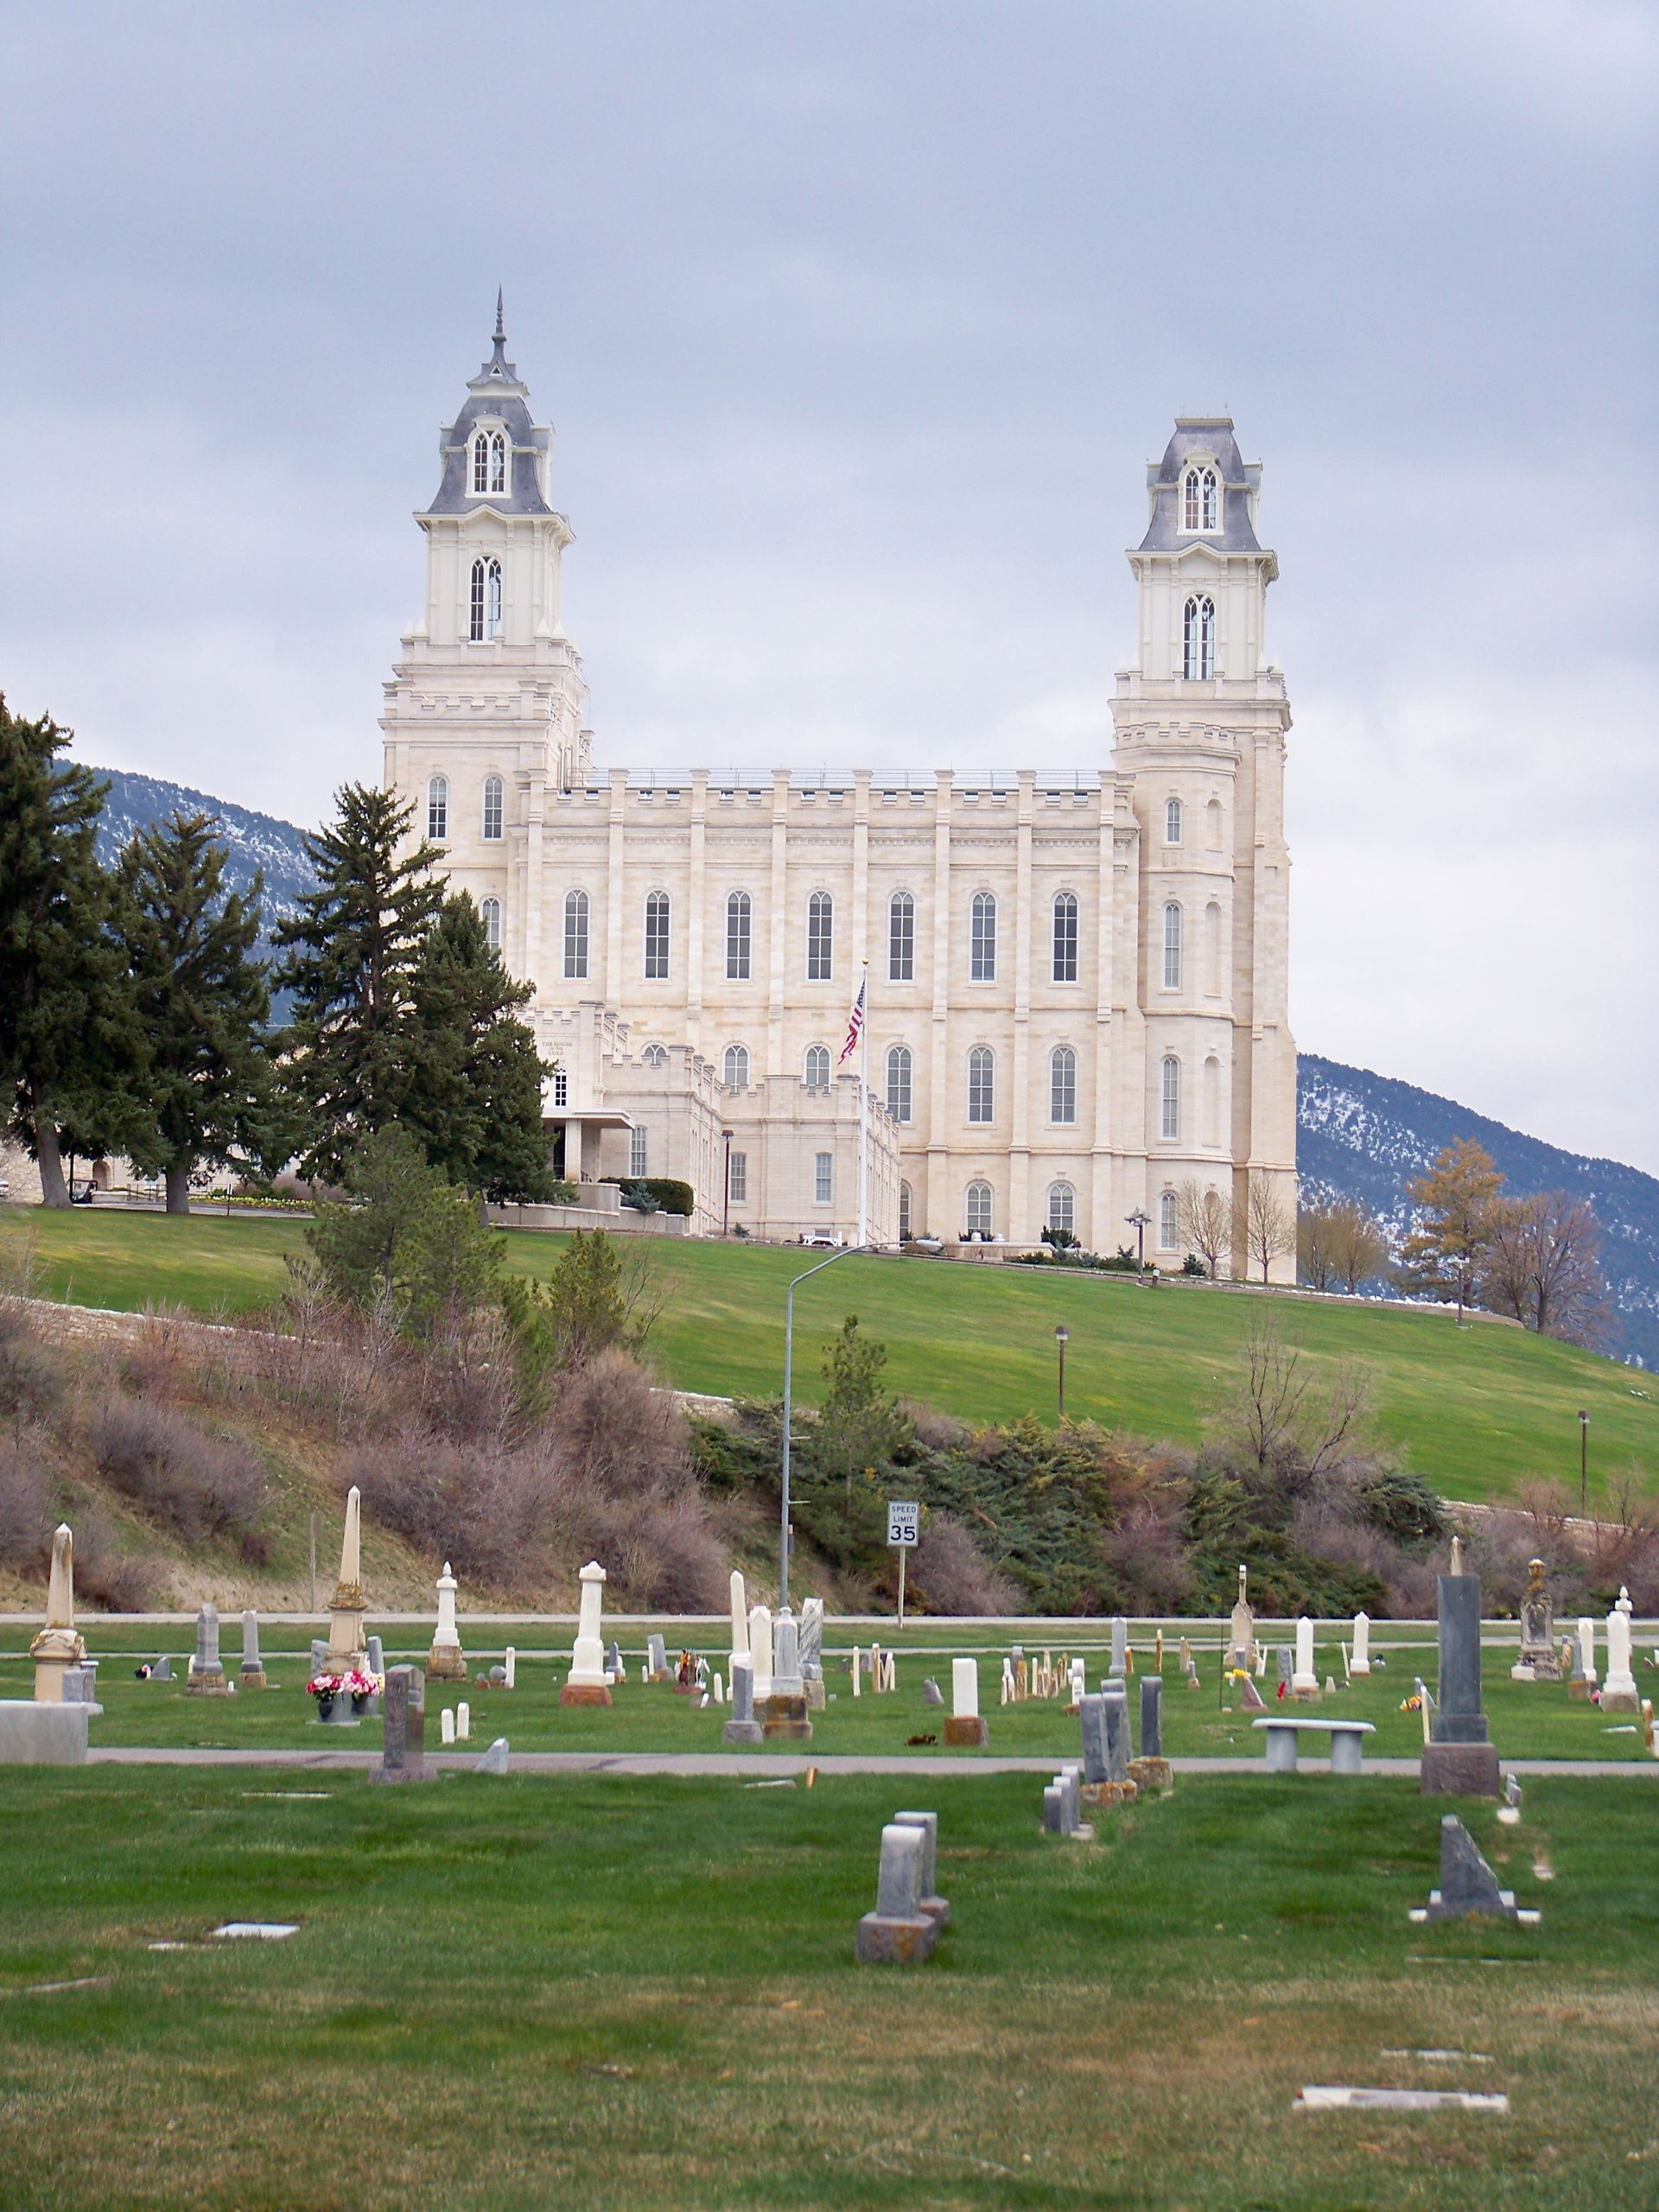 The Manti Utah Temple, including the entrance and cemetery.